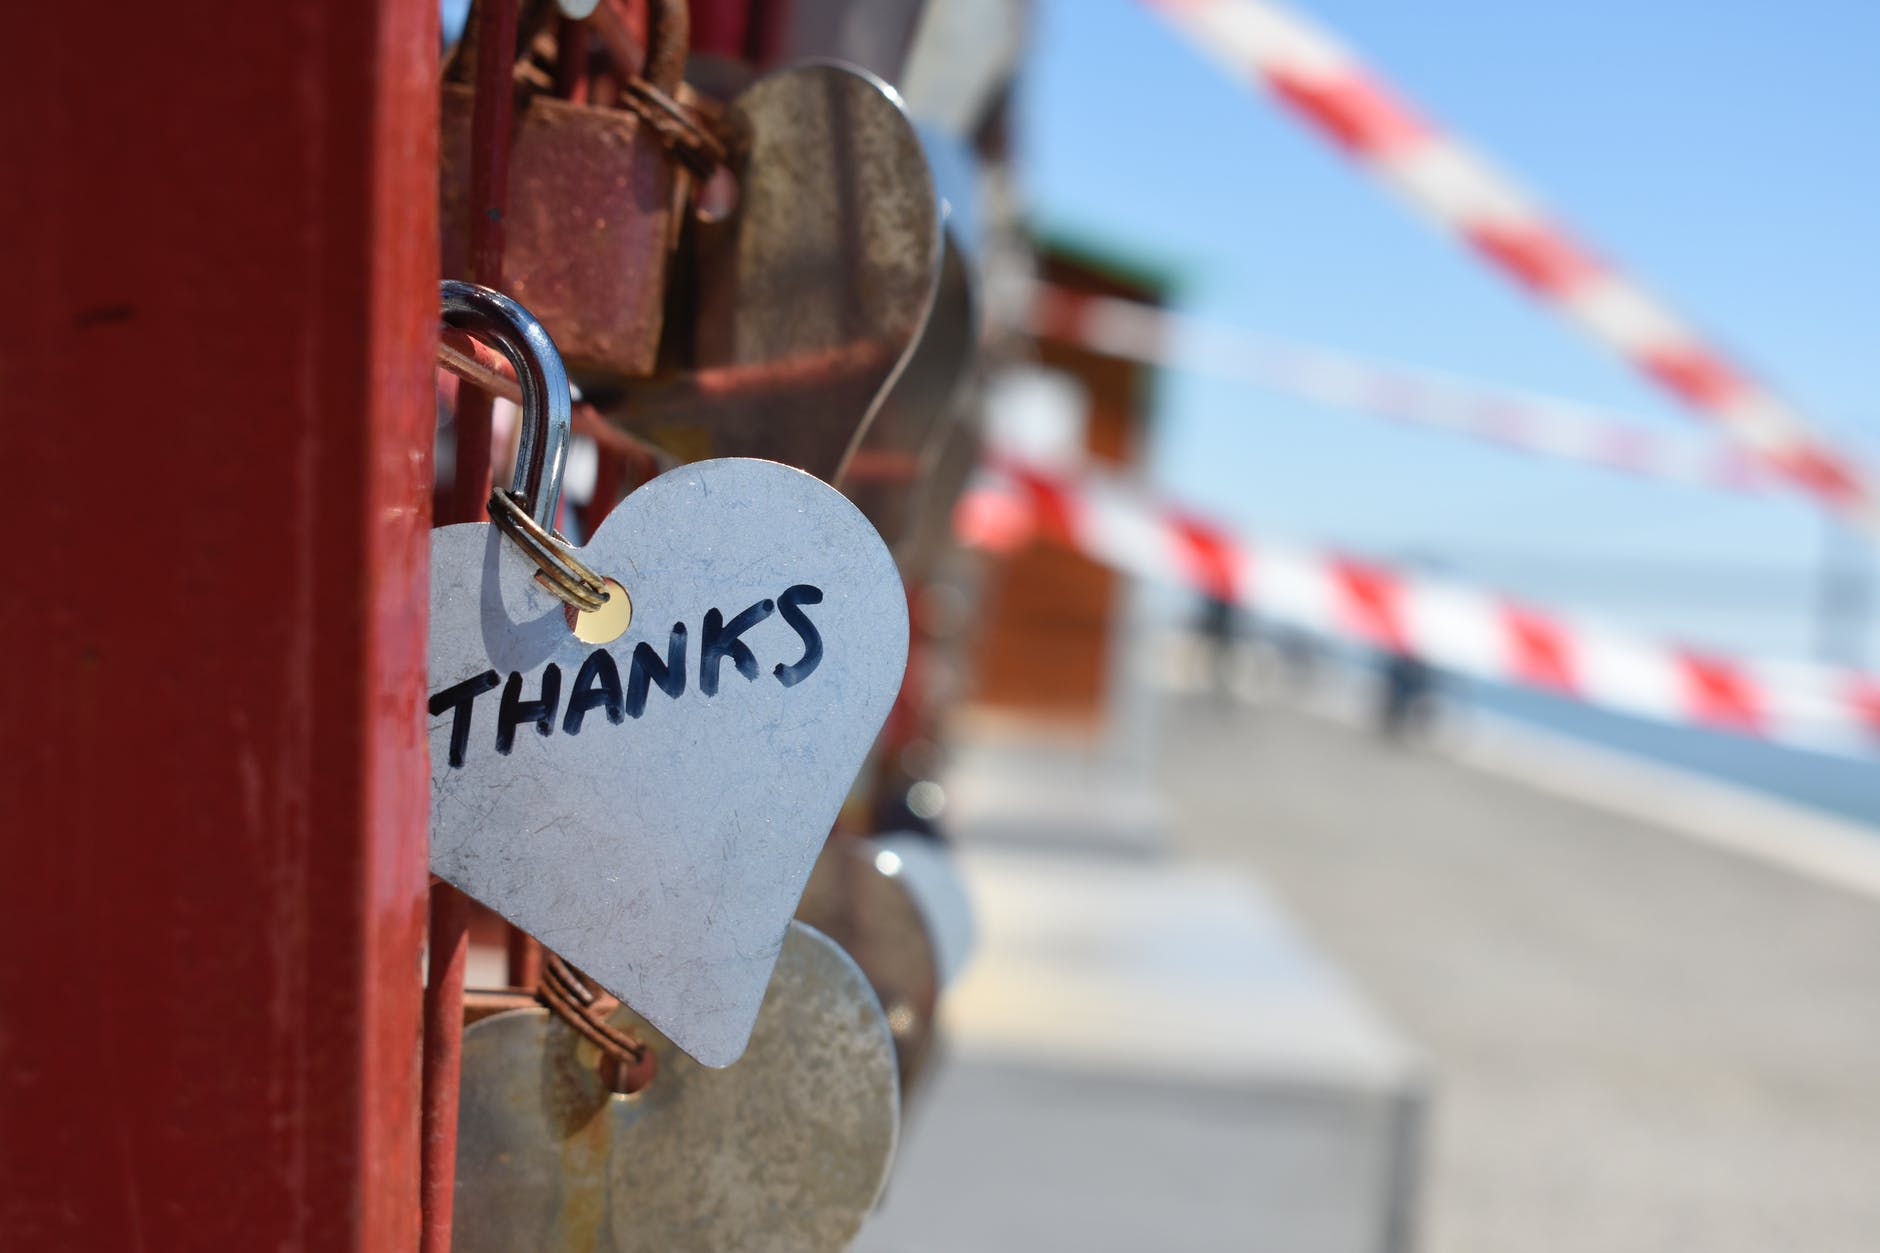 Heart shaped padlock with the word 'thanks' written on it